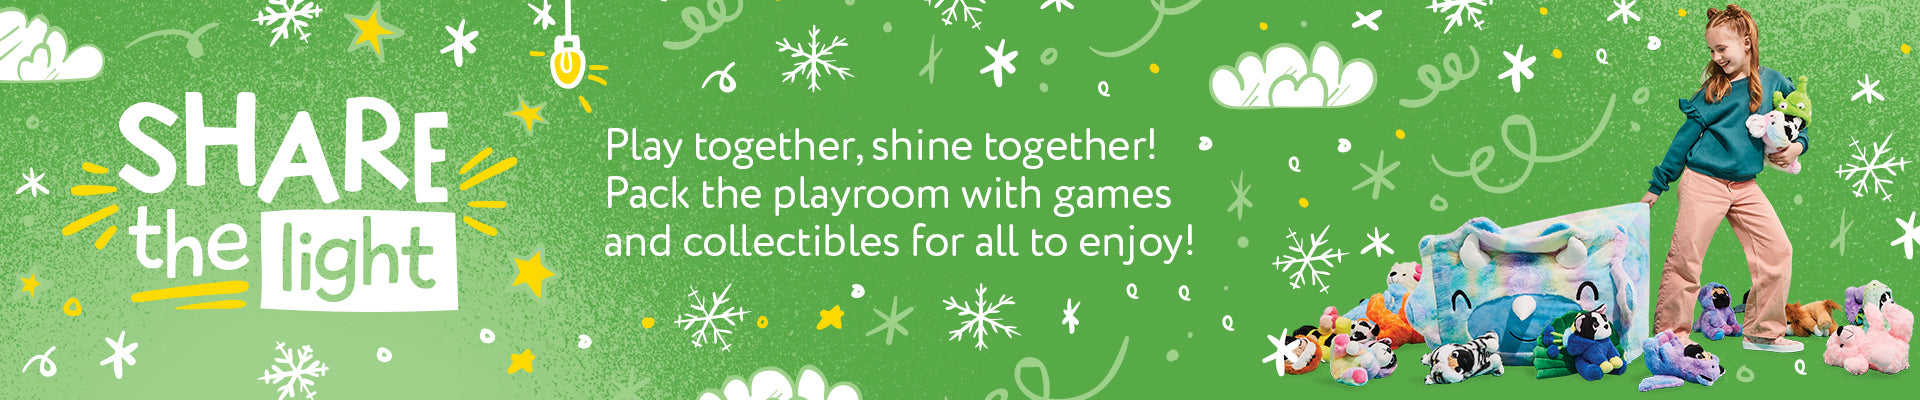 Mastermind Toys - Share the Light - Play together, shine together! Pack the playroom with games and collectibles for all to enjoy!